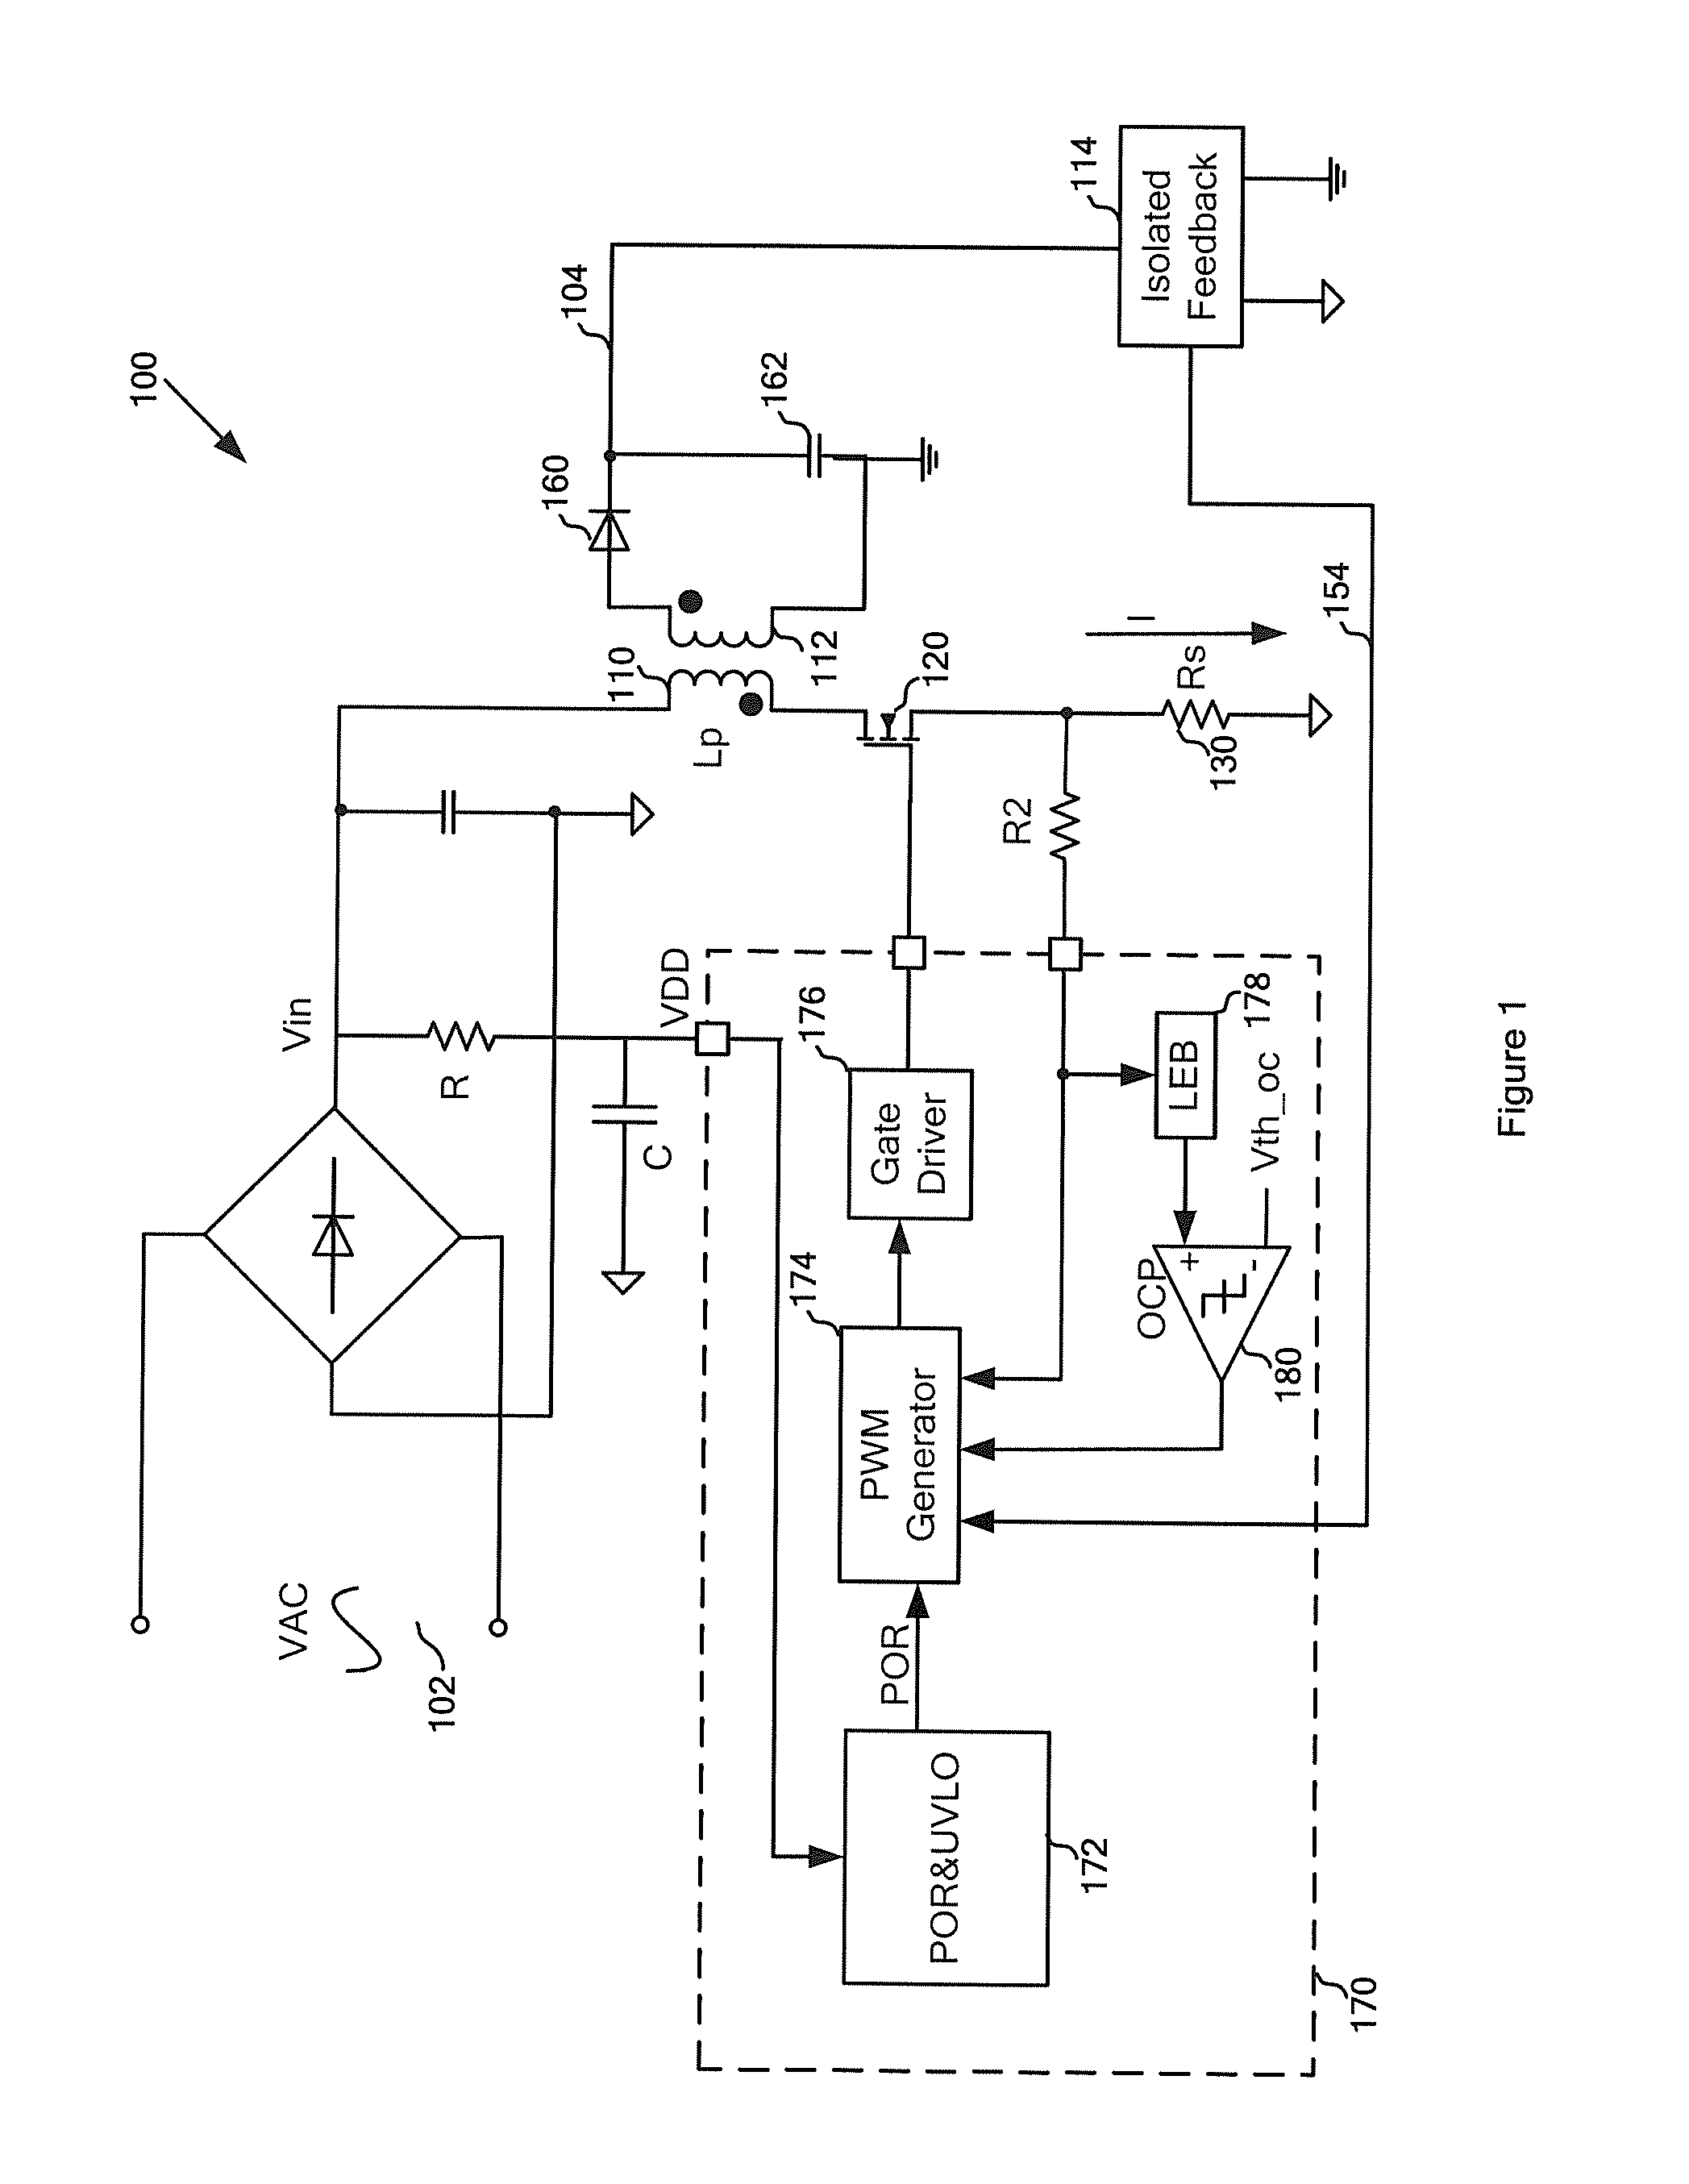 Systems and methods for constant voltage control and constant current control